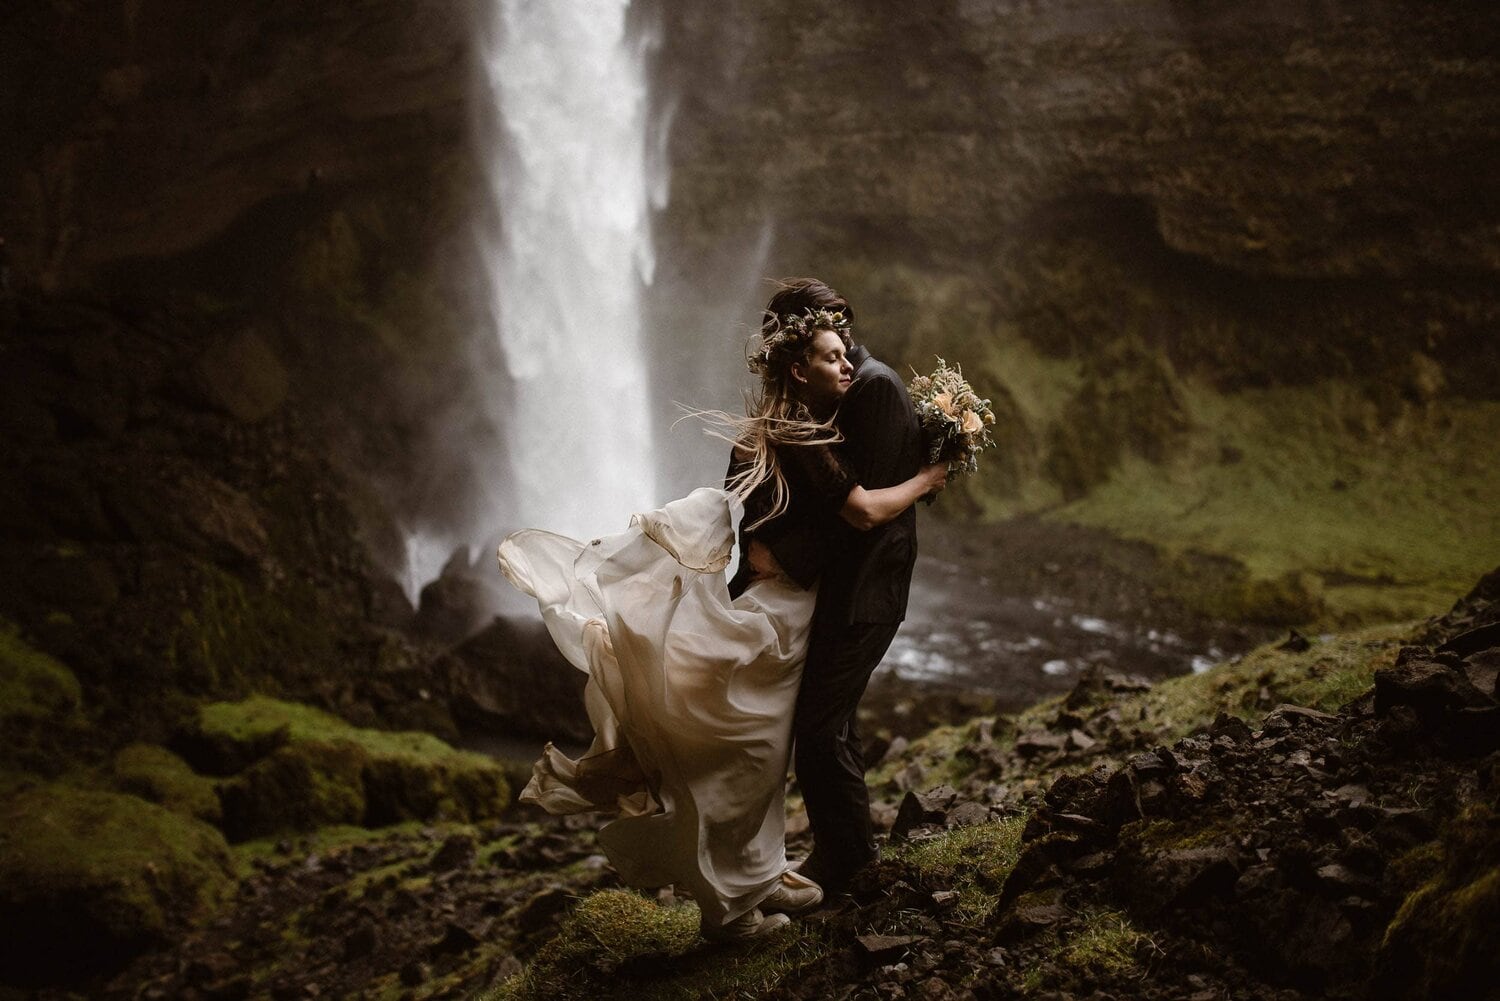 Bride and groom embrace in front of a waterfall.